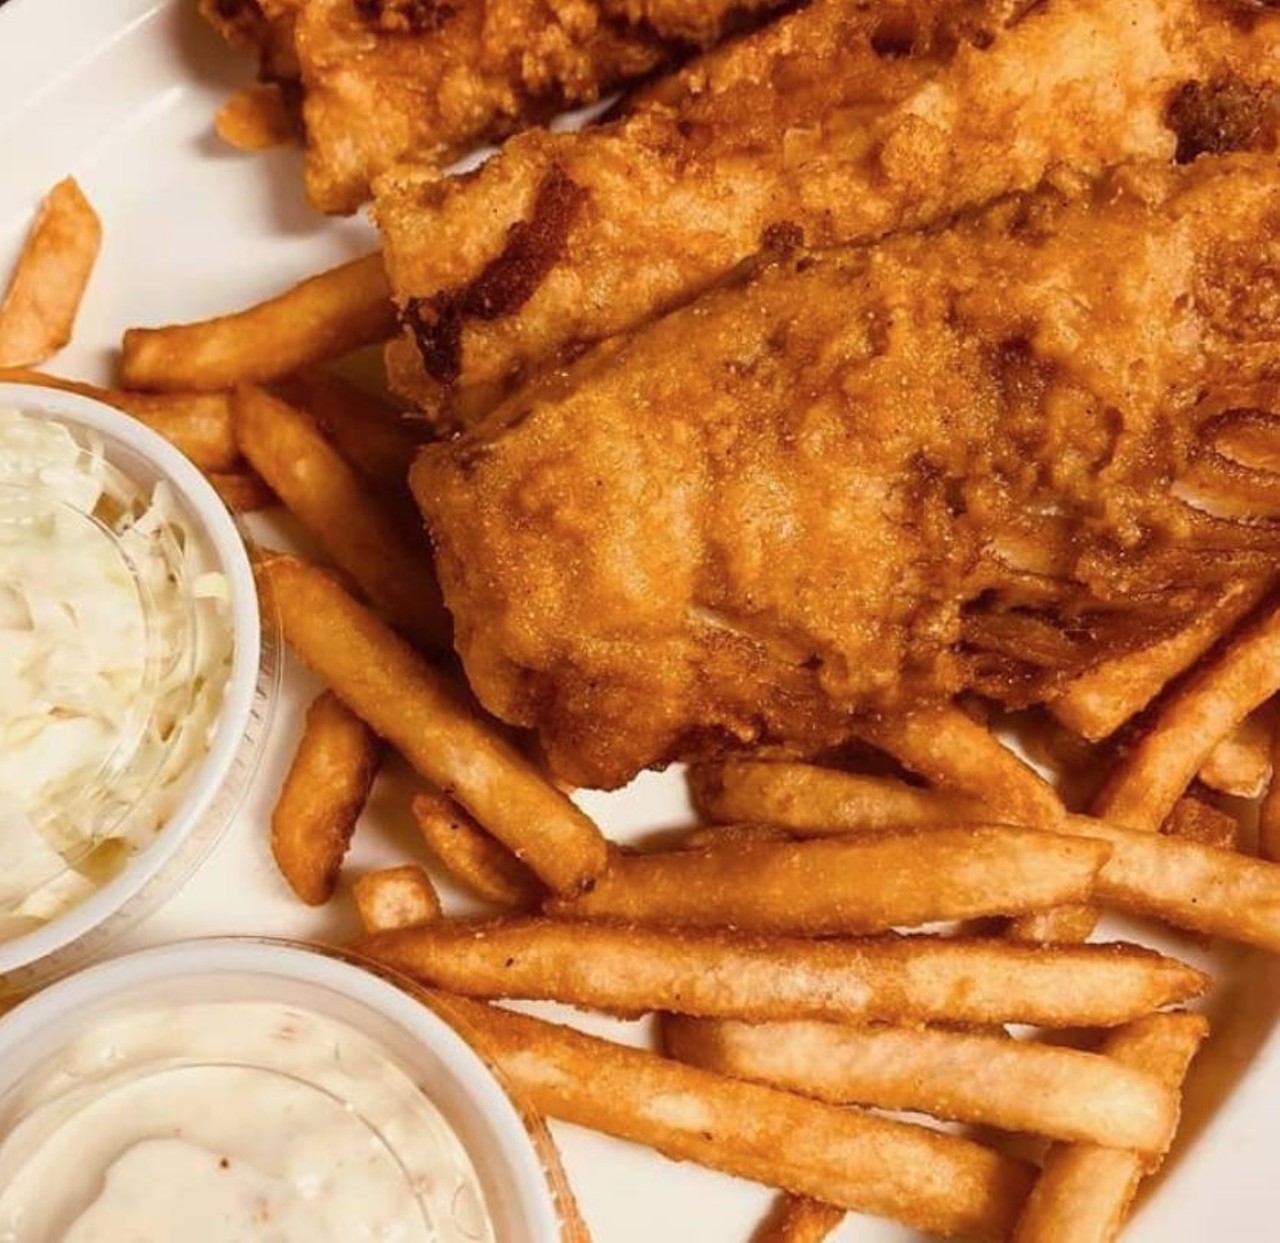 Crow's Nest Bar and Grill
6166 N. Canton Rd., Canton; 734-459-4020 
Get all-you-can-eat fish-n-chips every Friday. Cod fillets are hand-dipped in a light, crispy beer-batter and served with fries and coleslaw. 
Photo via Photo via Crow's Nest Bar and Grill / Facebook 